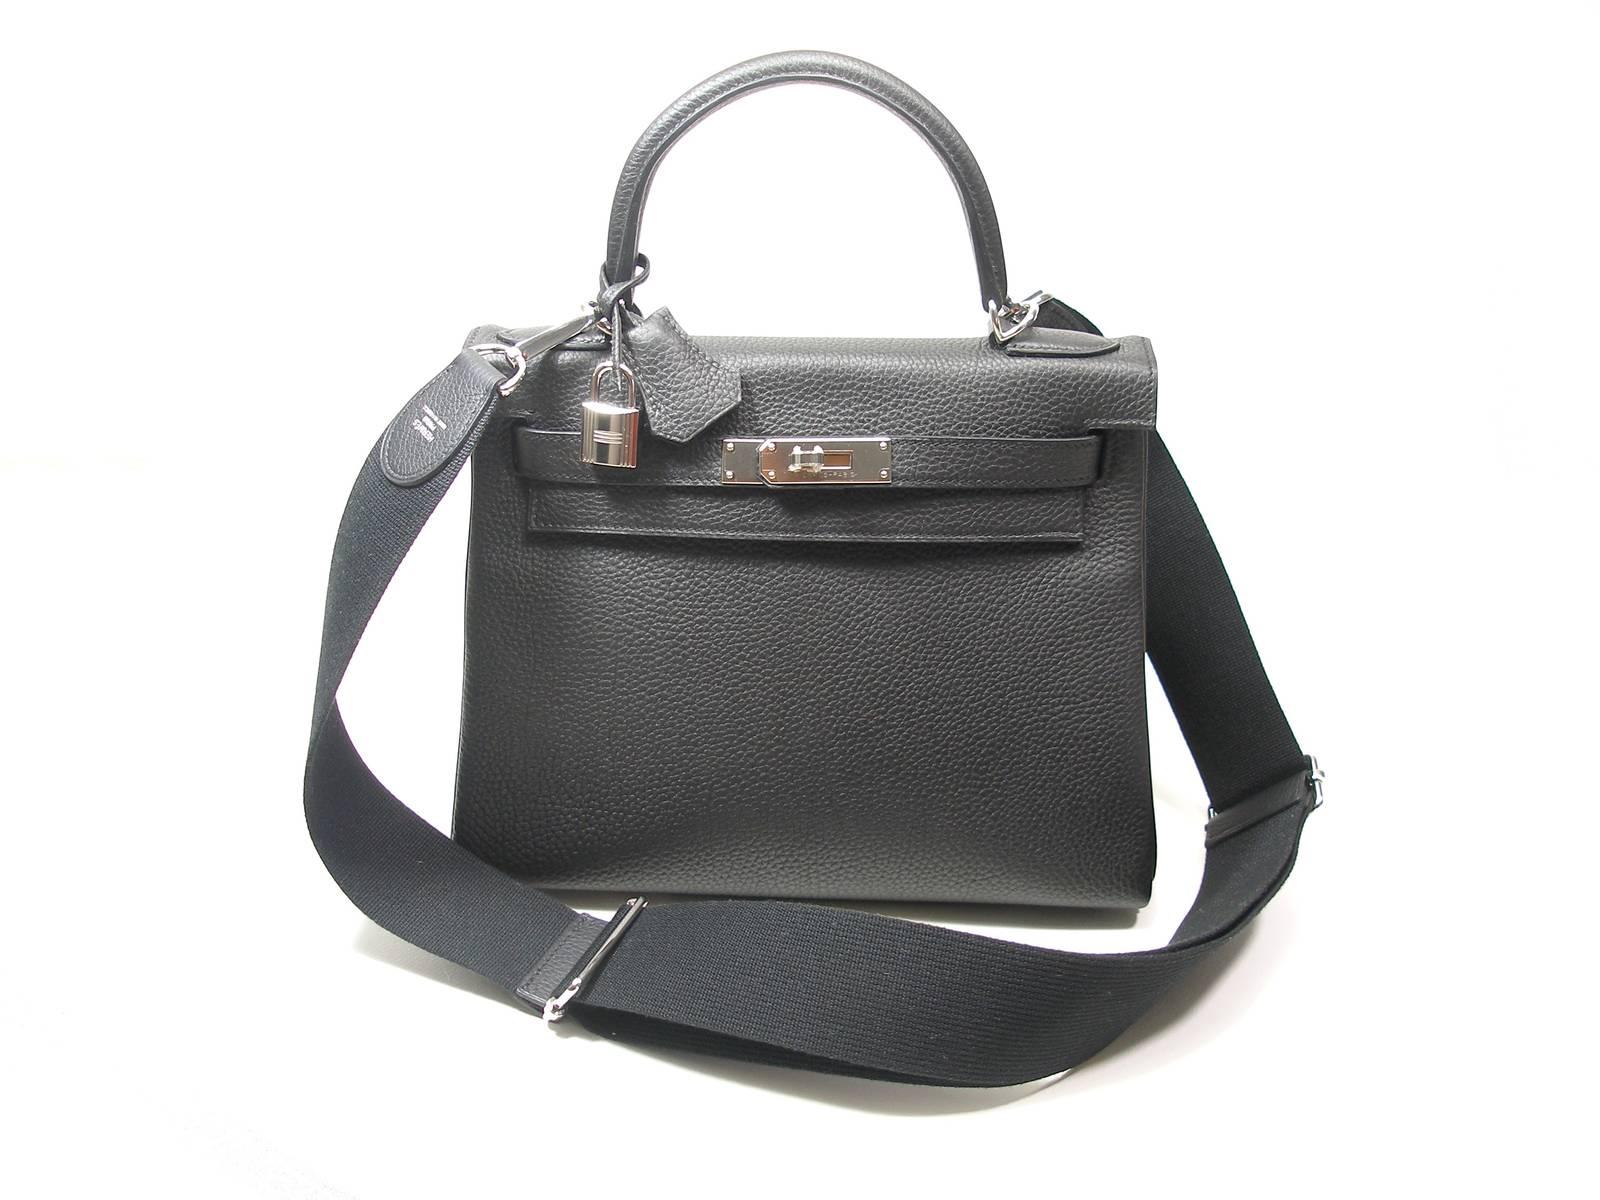 RARE PIÈCE , difficulte to find , only on order with waiting .
Hermes Kelly Bag Retouné 28 cm 
Absoluty Brand New 
Condition : 10/10
Plastic is still on hardware 
Colour:  black & bleu indigo
Black Togo leather outside and  Bleu indigo Chèvre inside